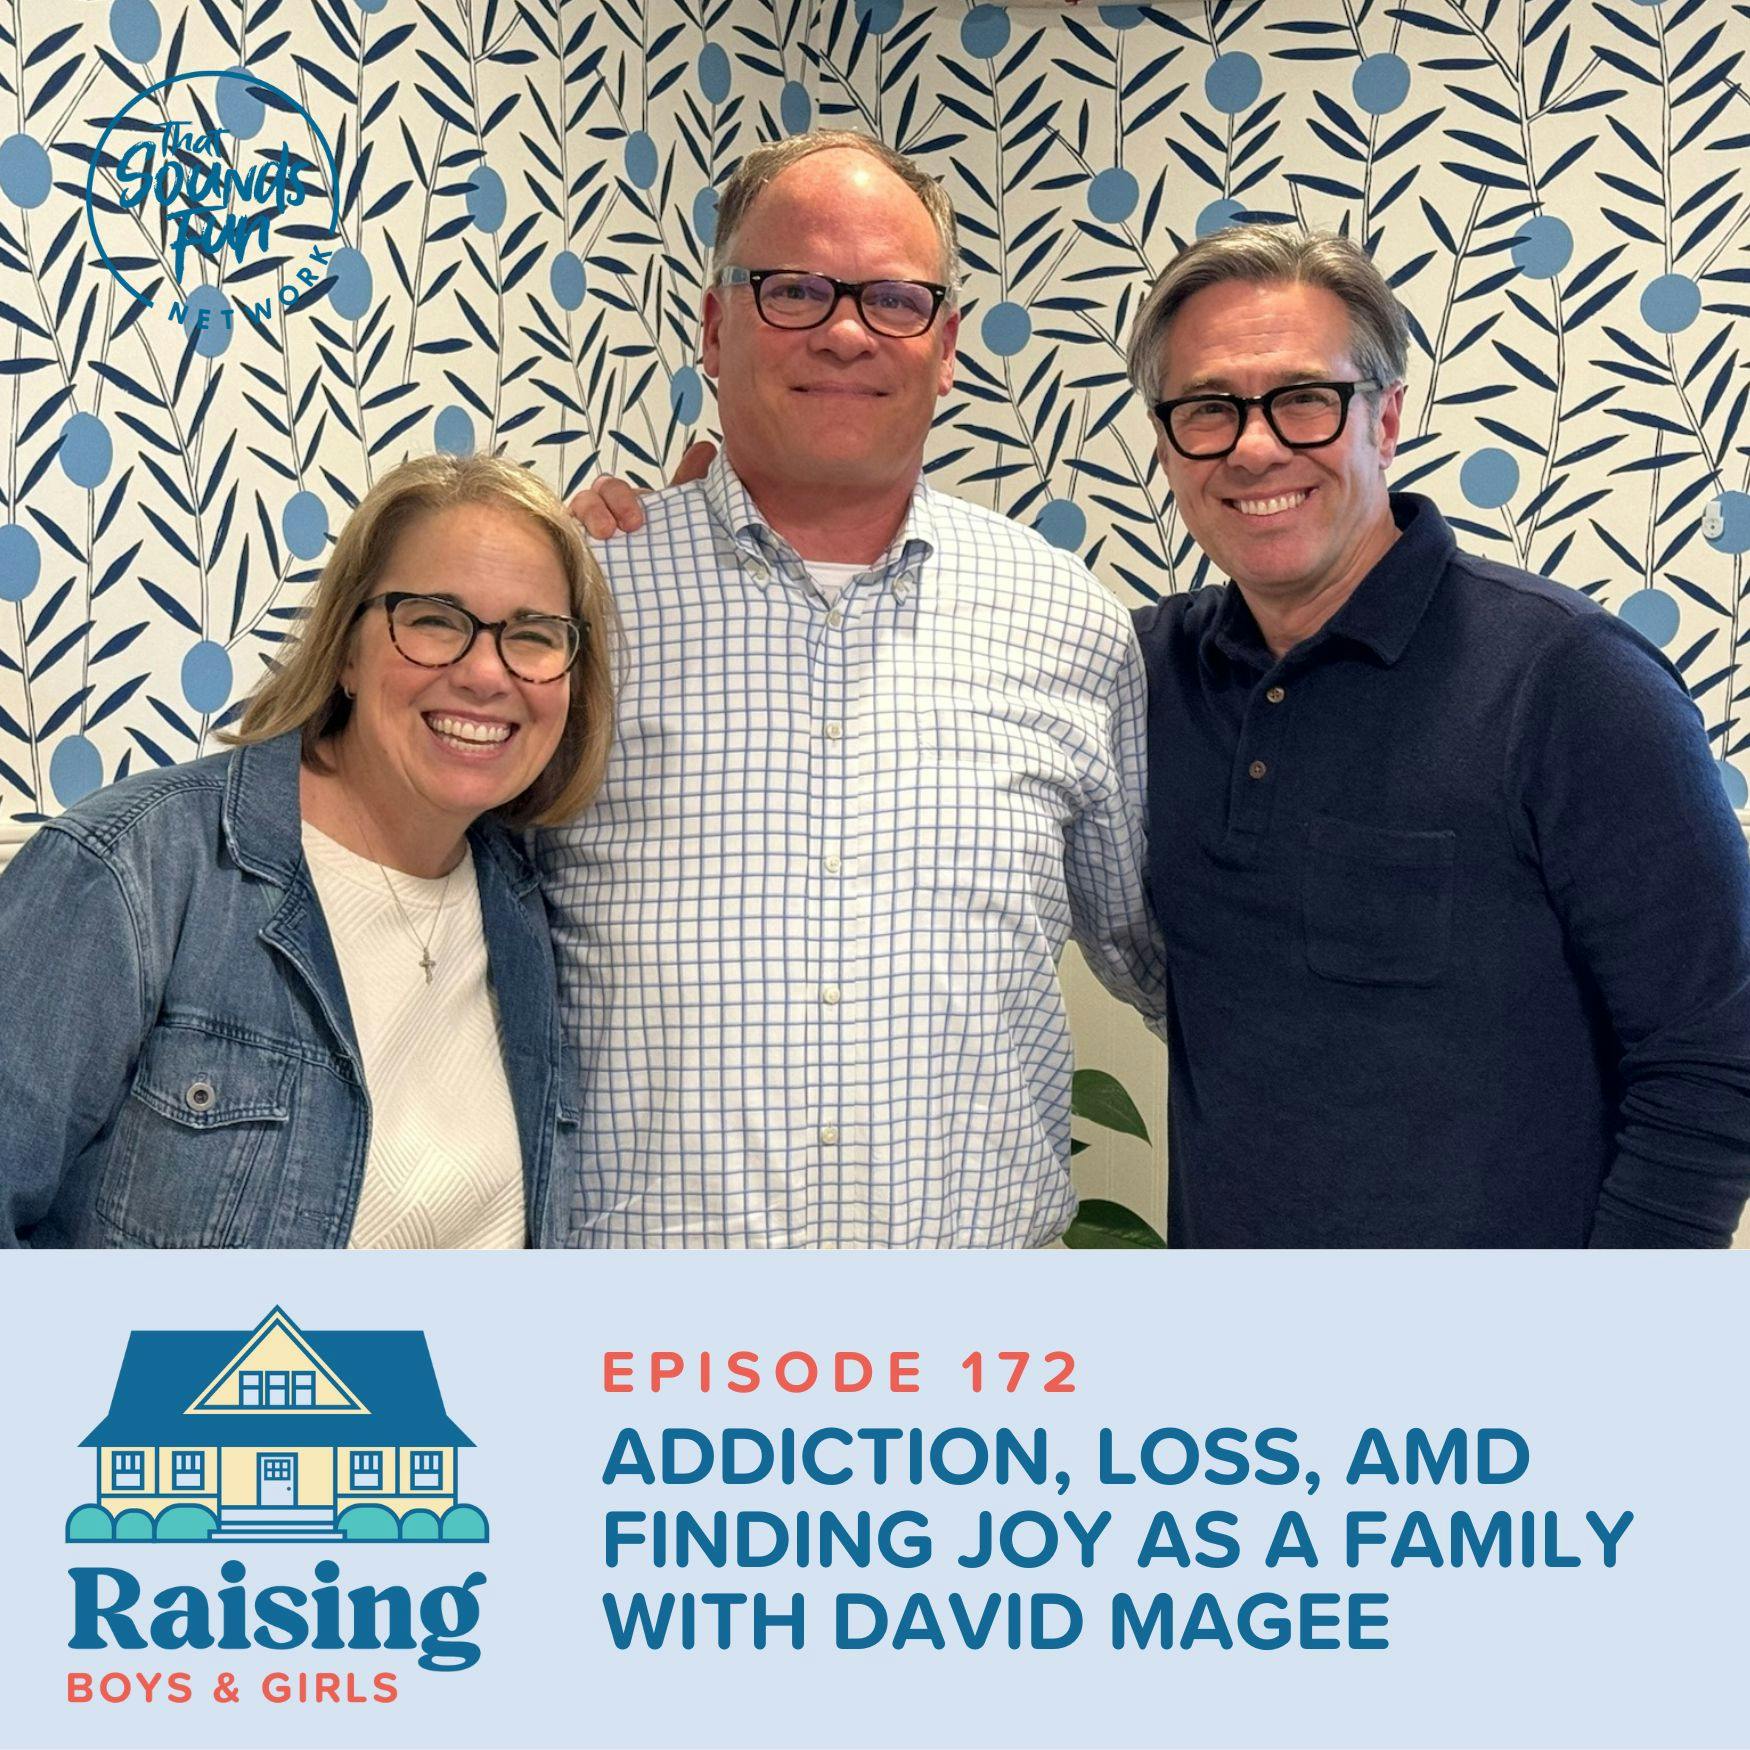 Episode 172: Addiction, Loss, and Finding Joy as a Family with David Magee